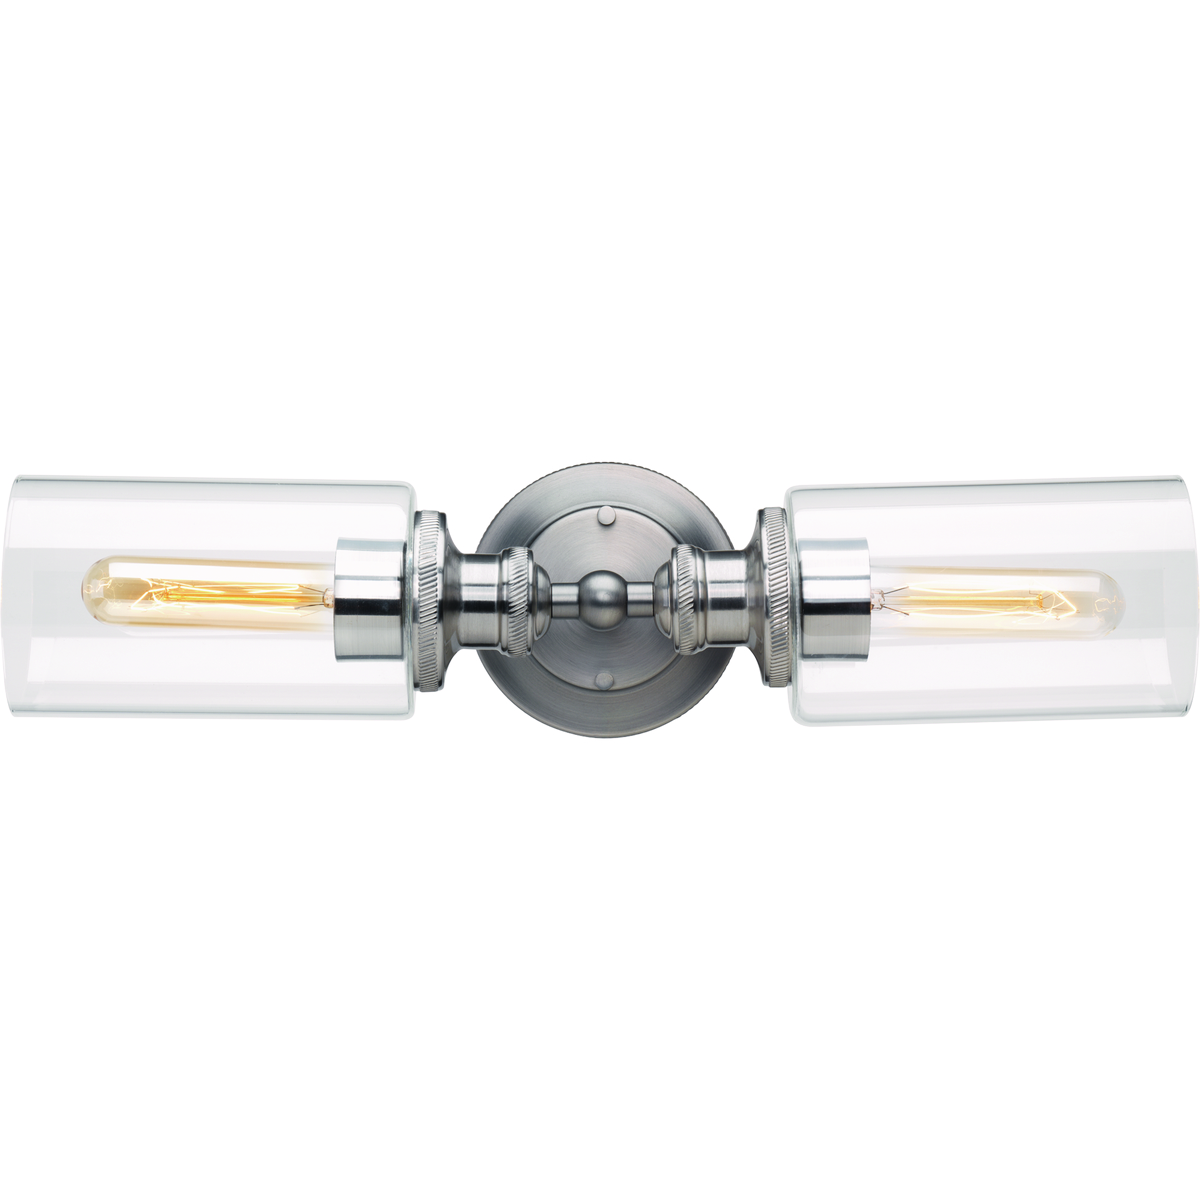 This two-light bath & vanity fixture offer a vintage electric feel. Clear glass shades featured on either side of the back plate. Two-toned finish antique nickel with polished chrome accents. Can be mounted horizontally or vertically.